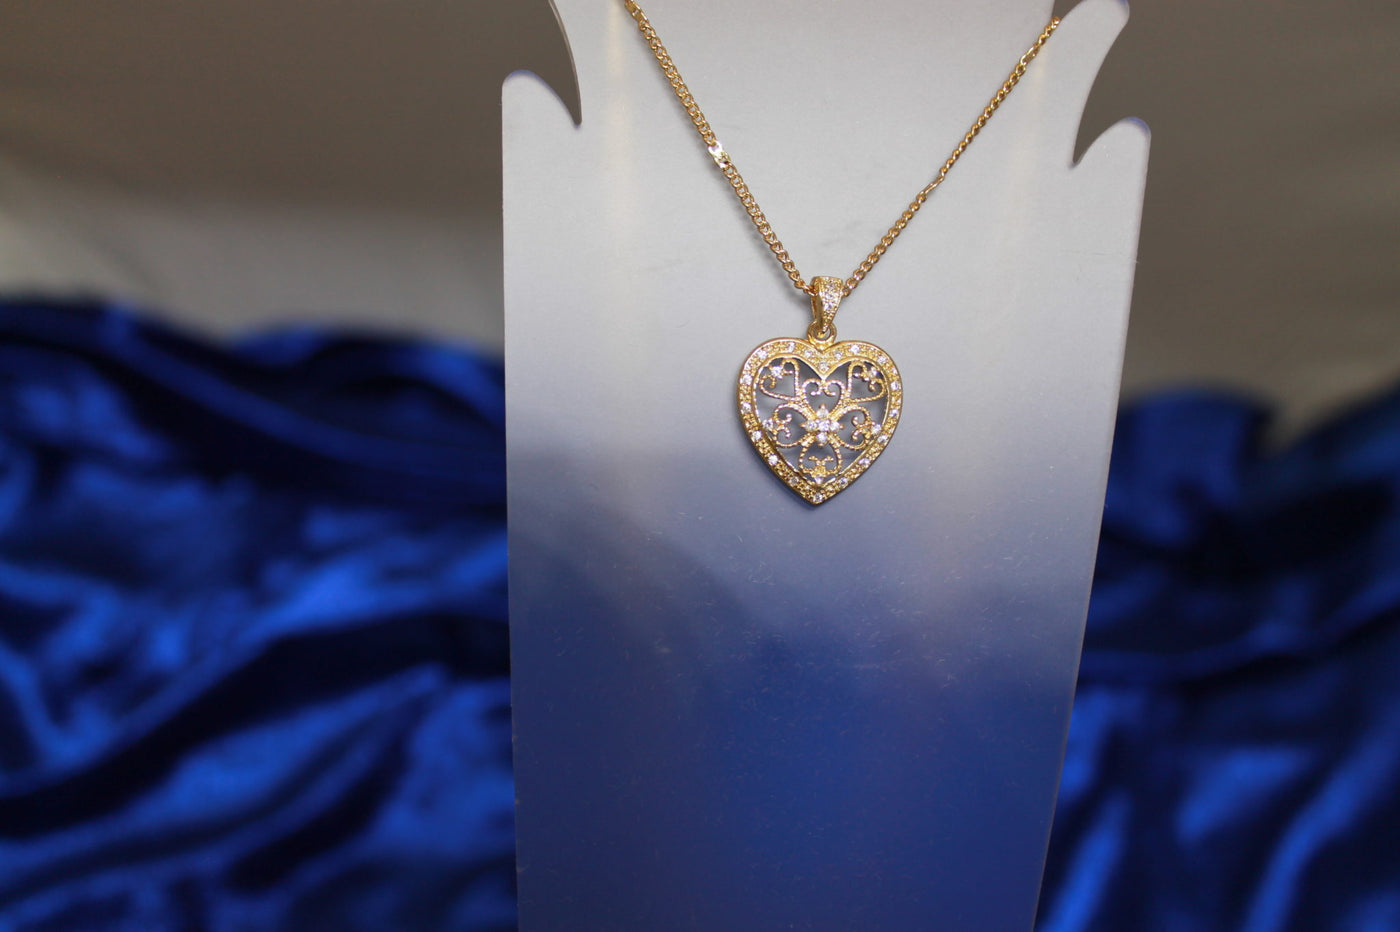 Pave Set Cubic Zirconia Filigree Heart Pendant Necklace in Yellow Gold Tone